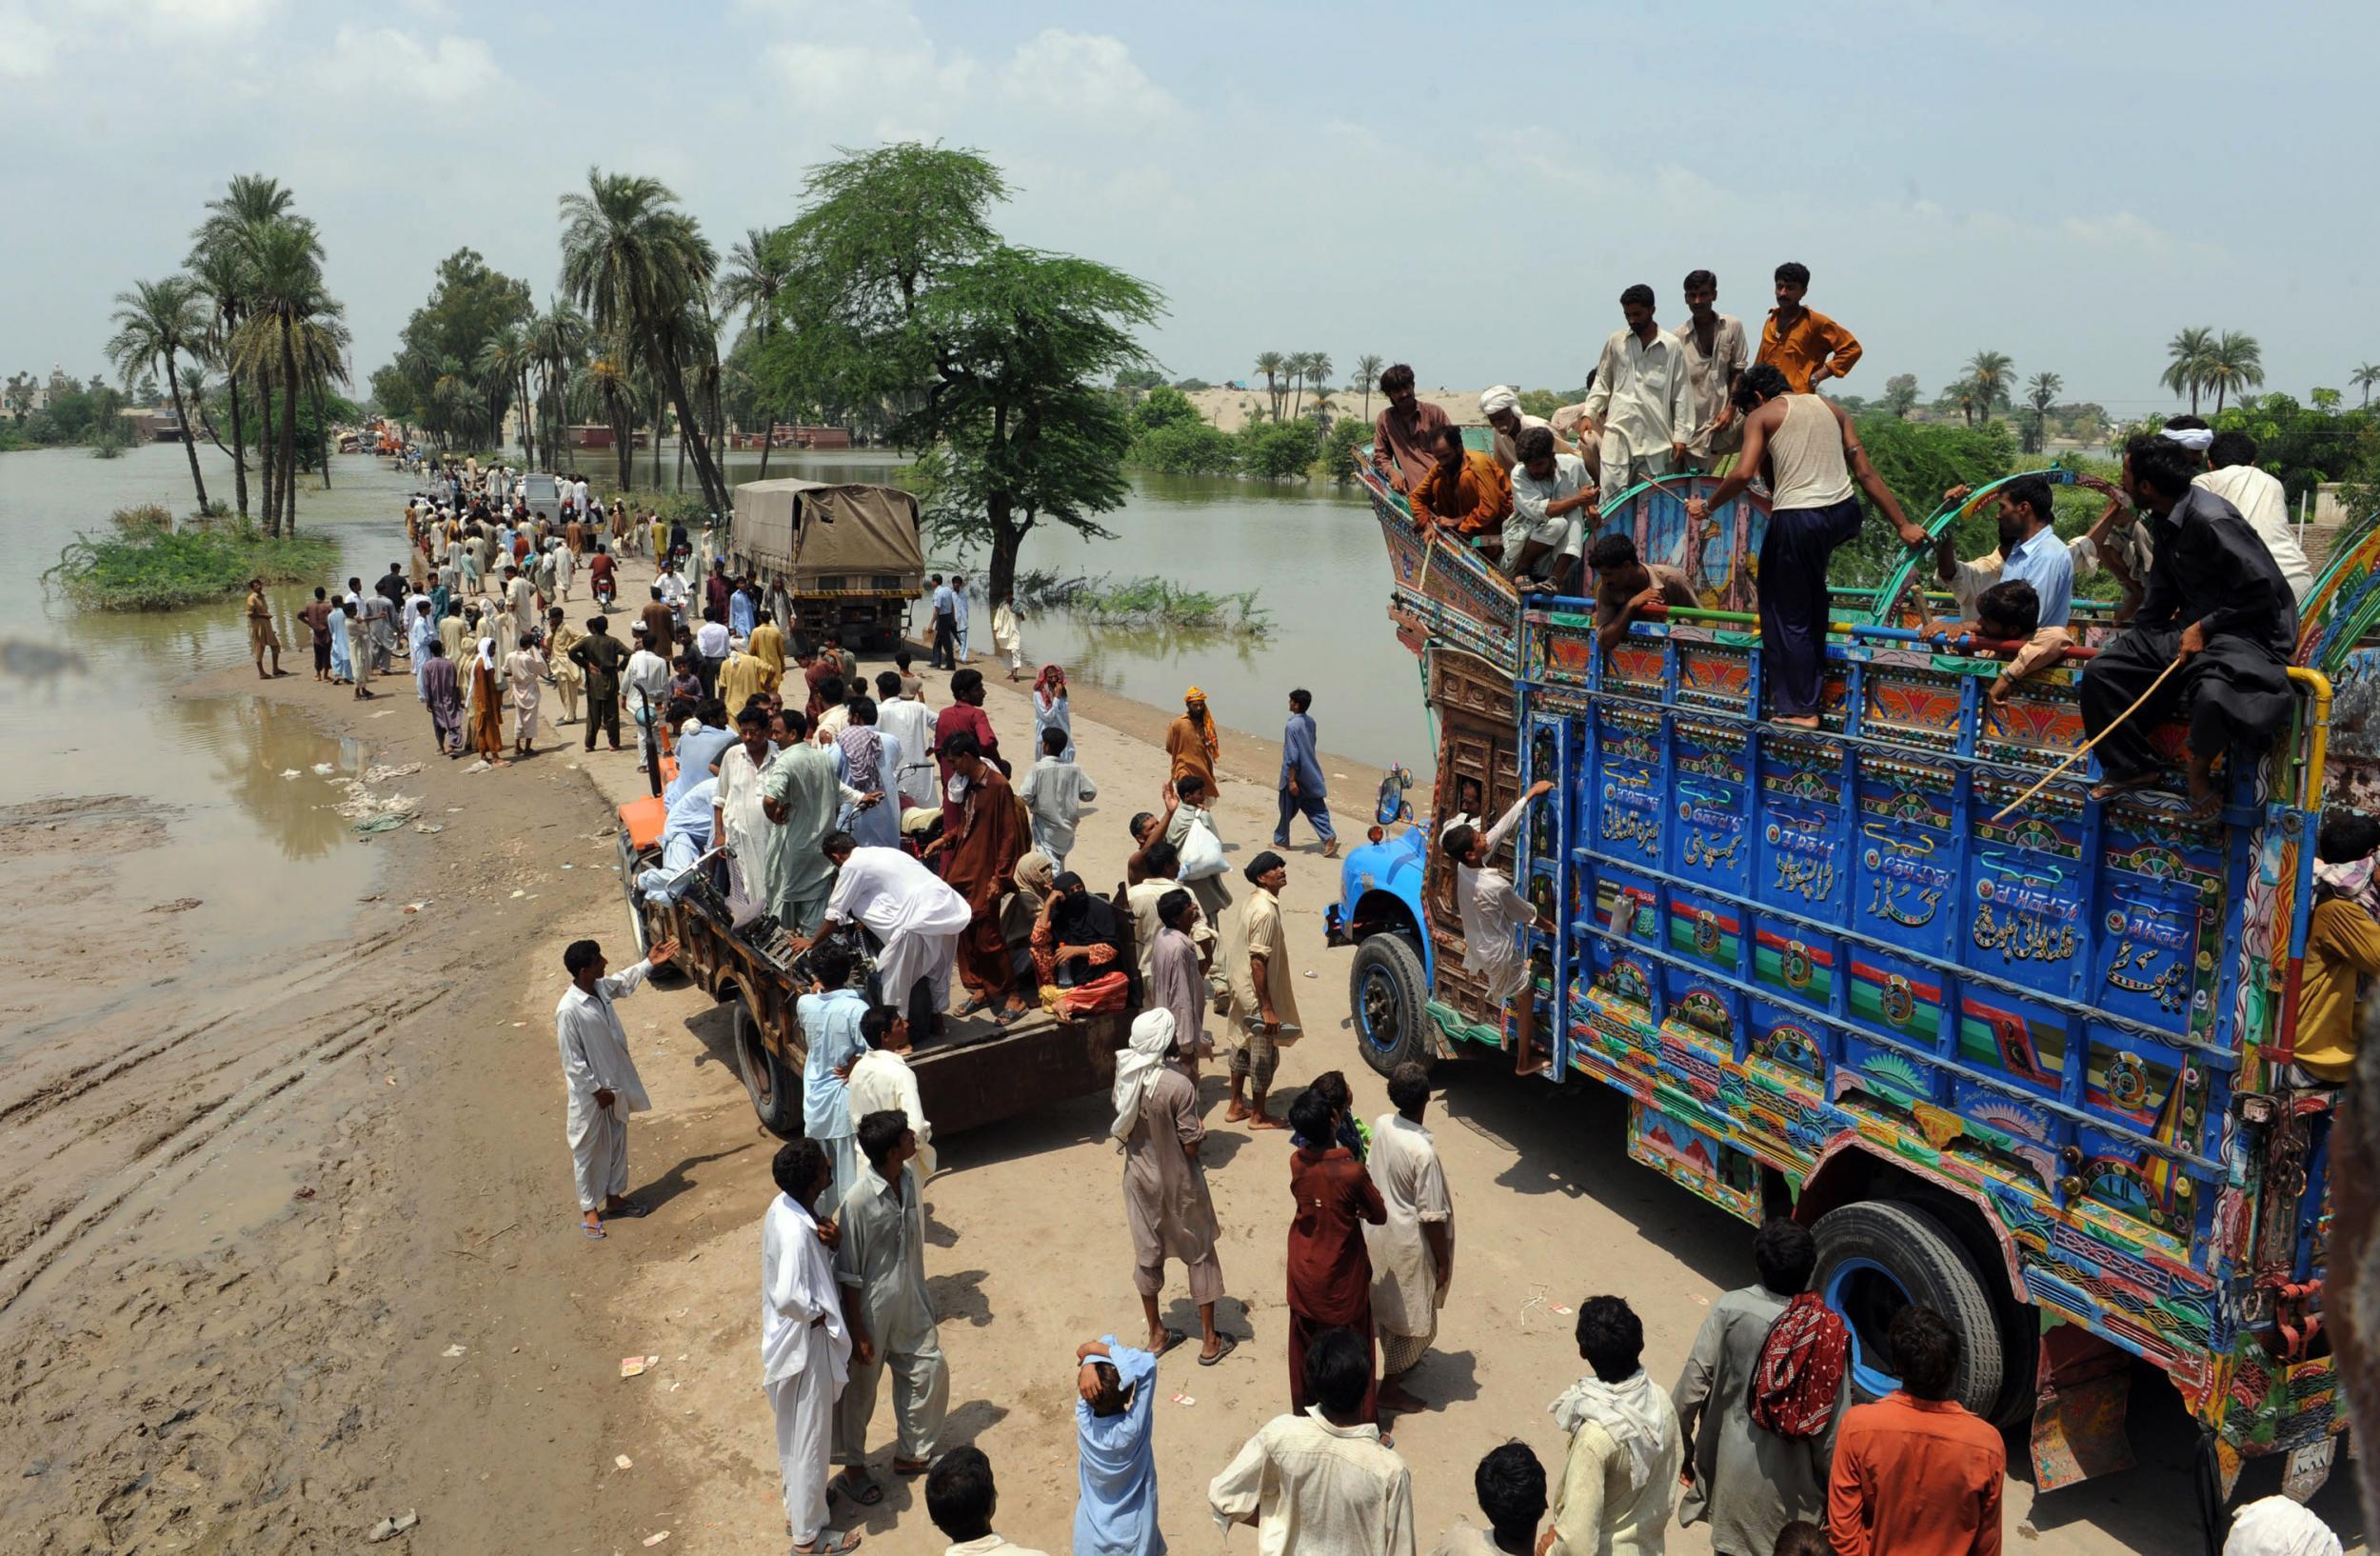 Flooding makes typhoid more likely to spread in Pakistan